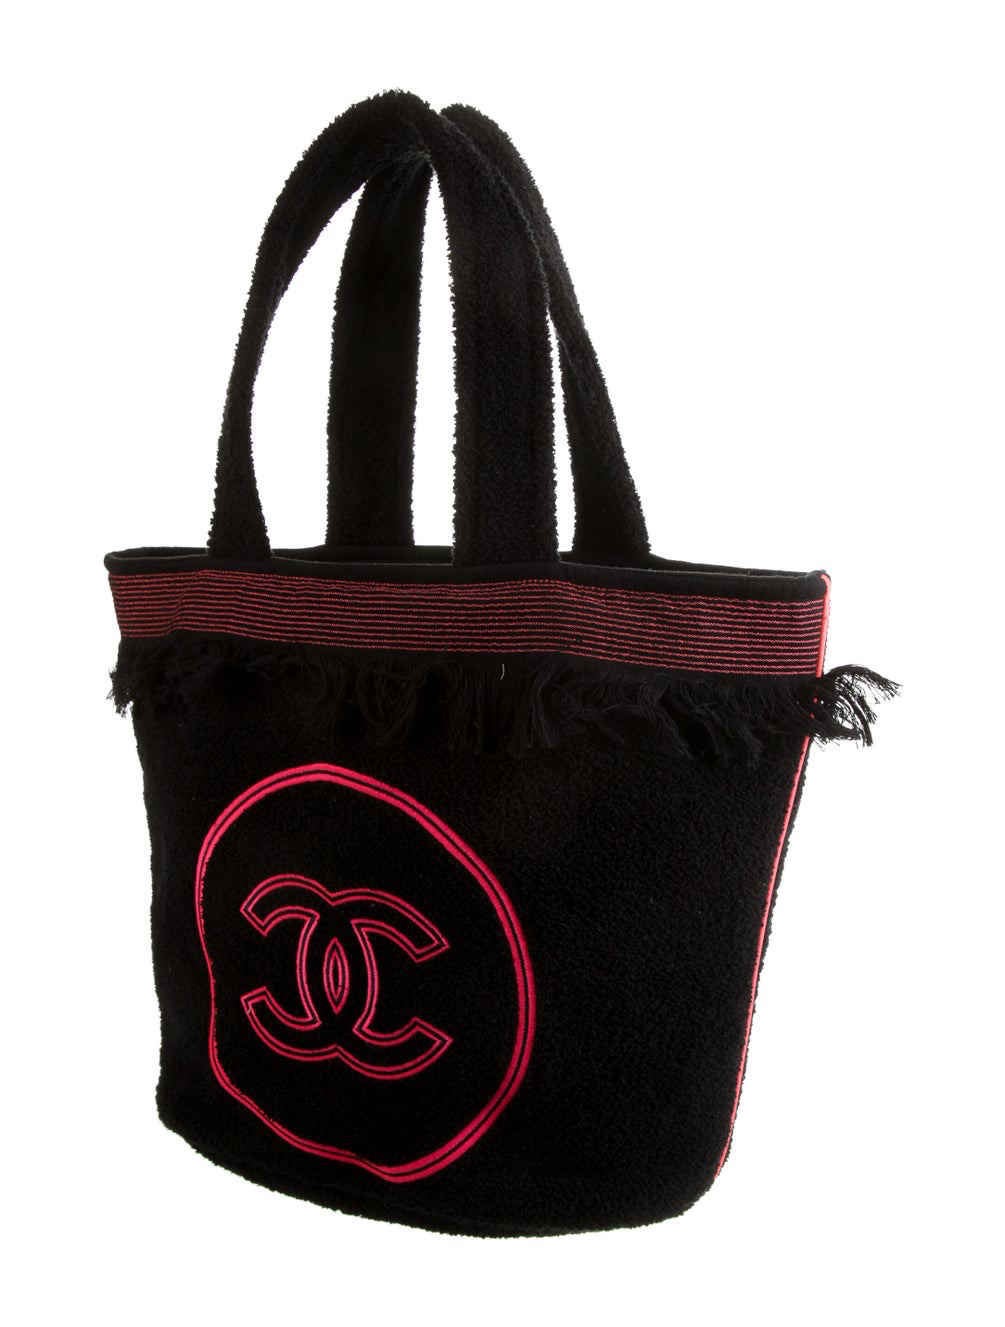 Chanel Towel Bag Black with Neon Pink, with Pouch and Towel, New MA001 -  Julia Rose Boston